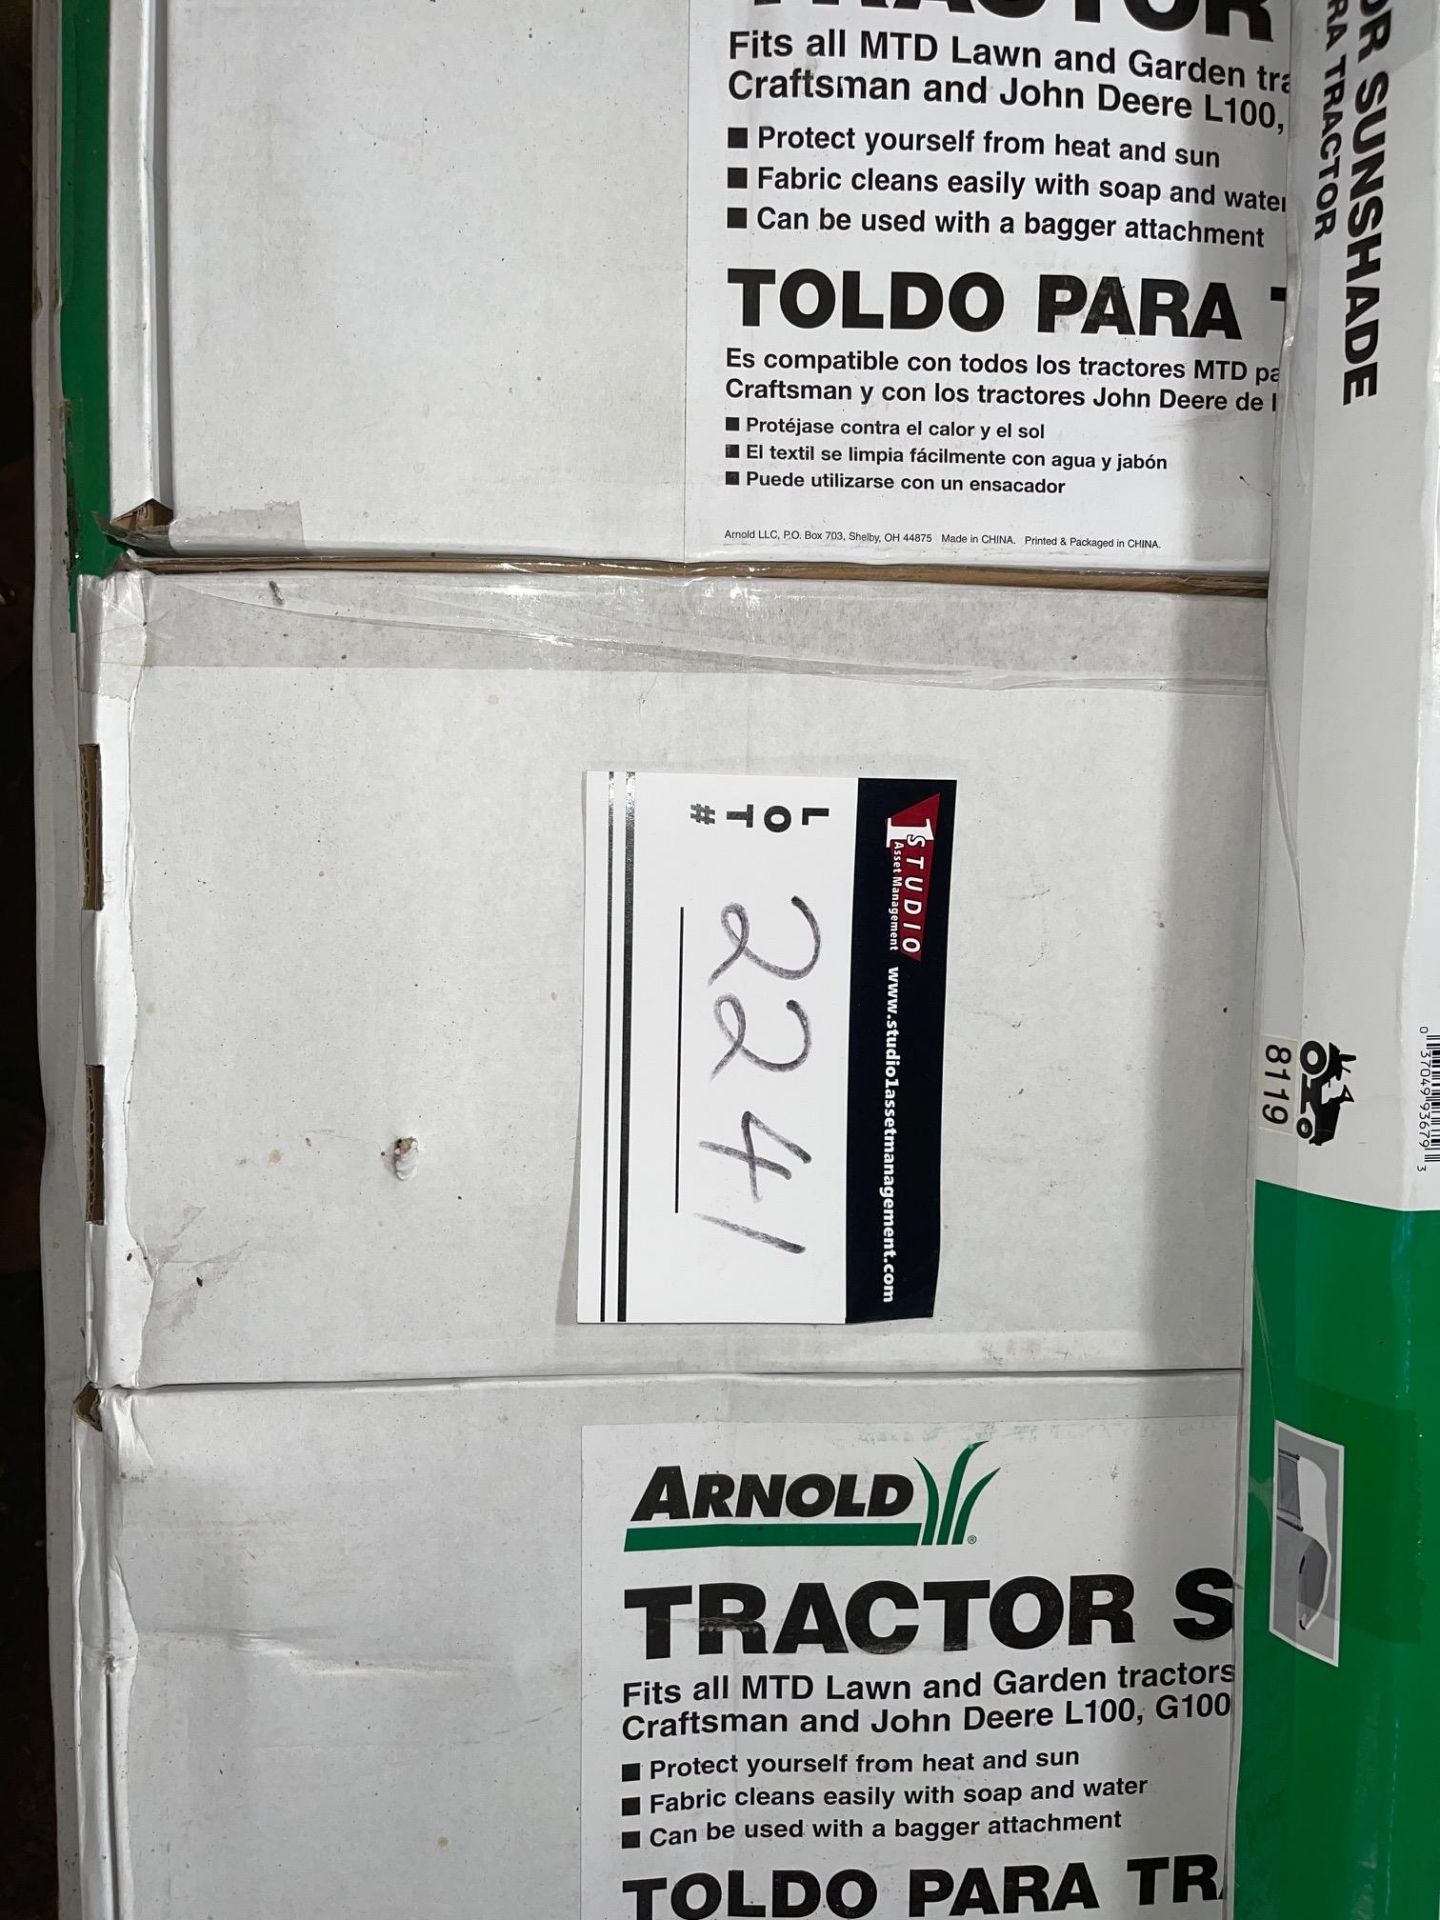 LOT OF ARNOLD TRACTOR SUNSHADES AND TOOL CARRIEA FIT ALL, MTD, PAULON, JOHN DEERE, HUSCAVARNA APPROX - Image 3 of 3